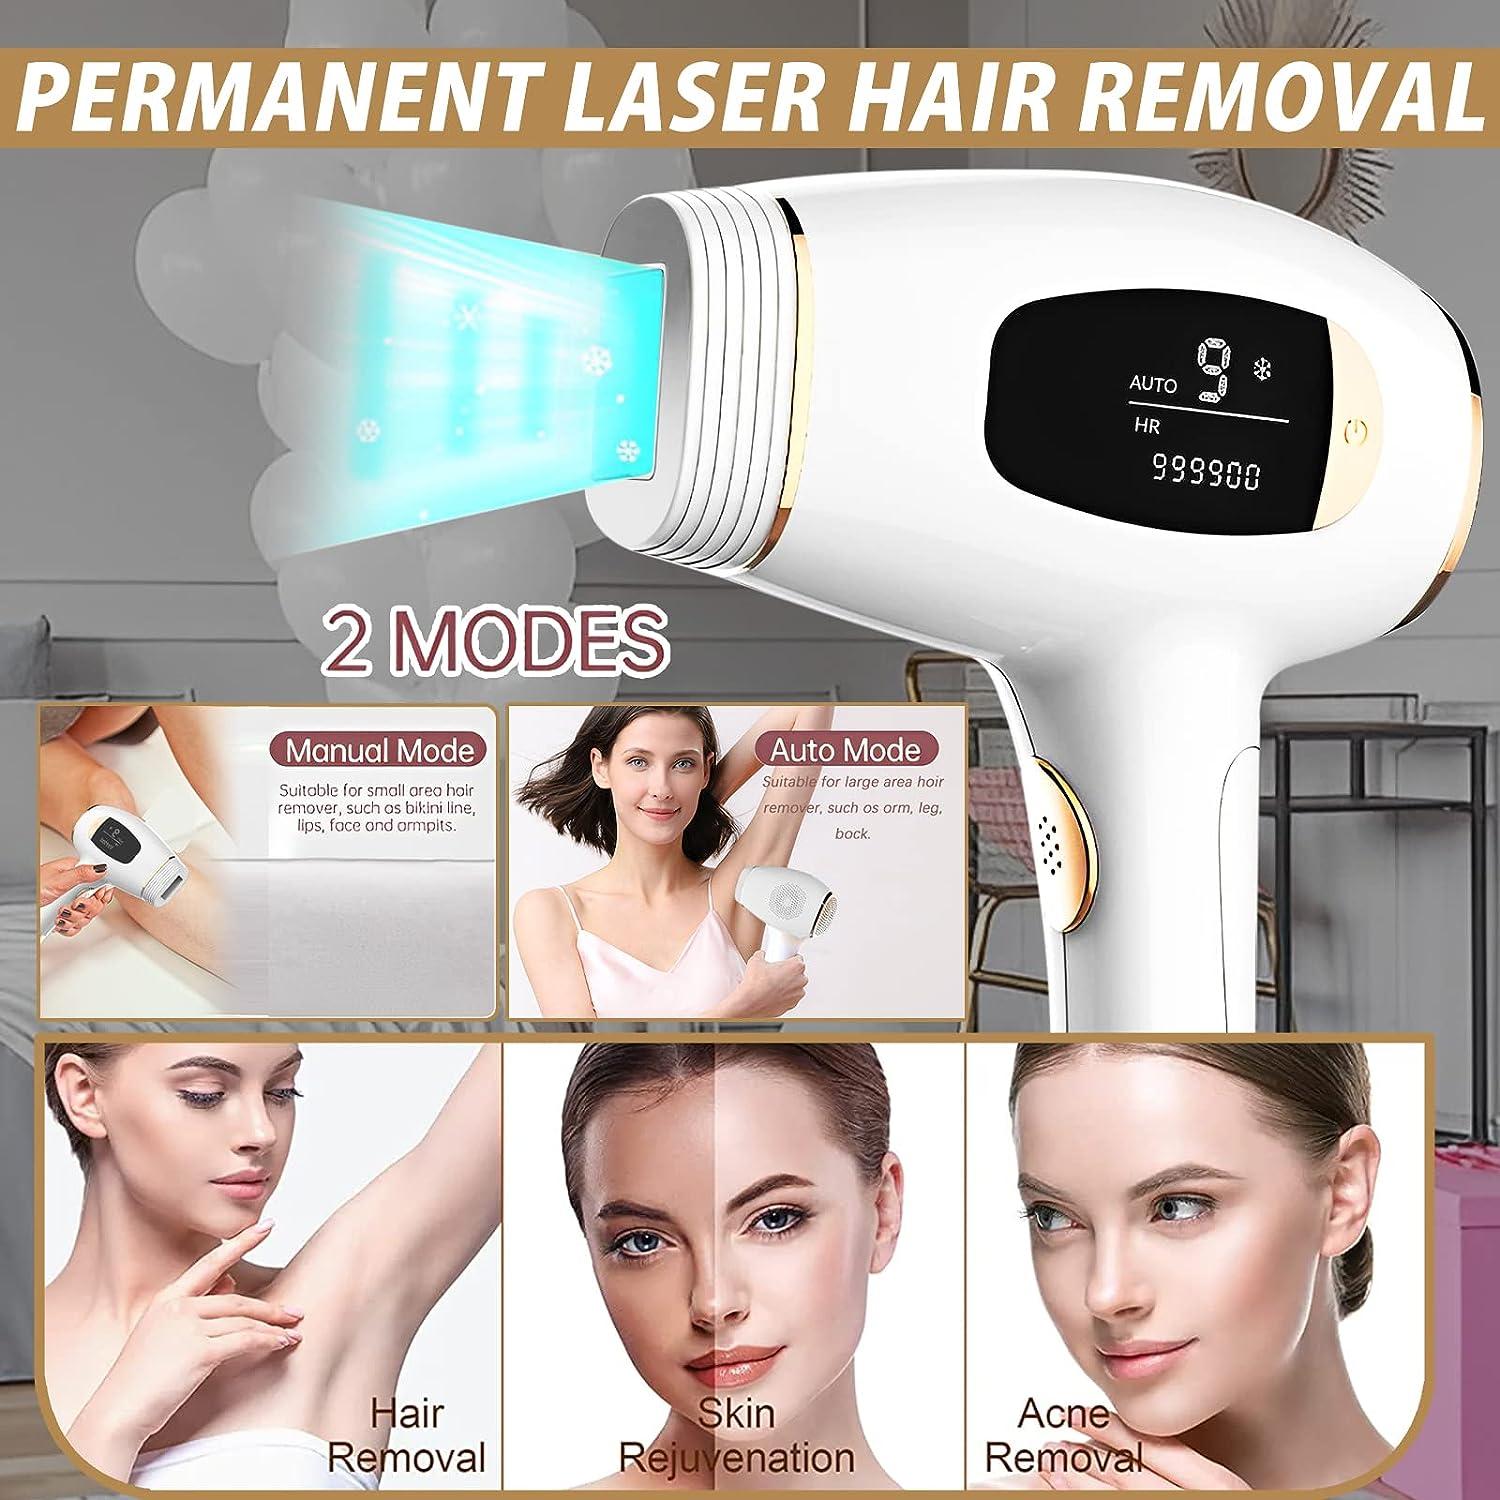 Hair Removal, Grooming, Skin Care Devices for Women & Men